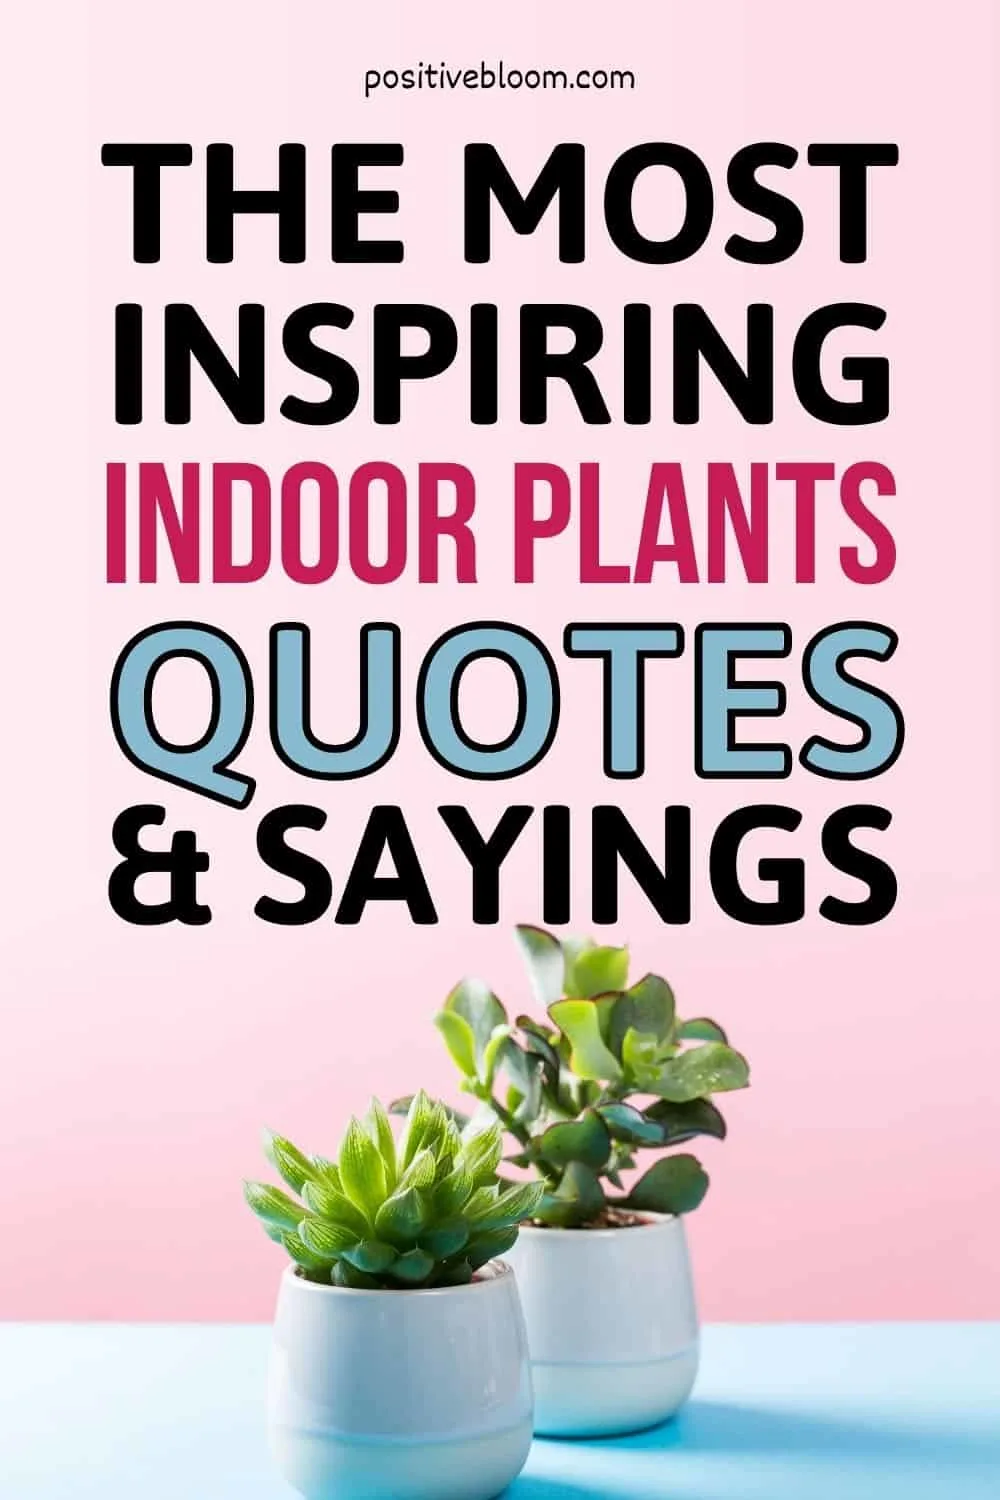 The Most Inspiring Indoor Plants Quotes And Sayings Pinterest